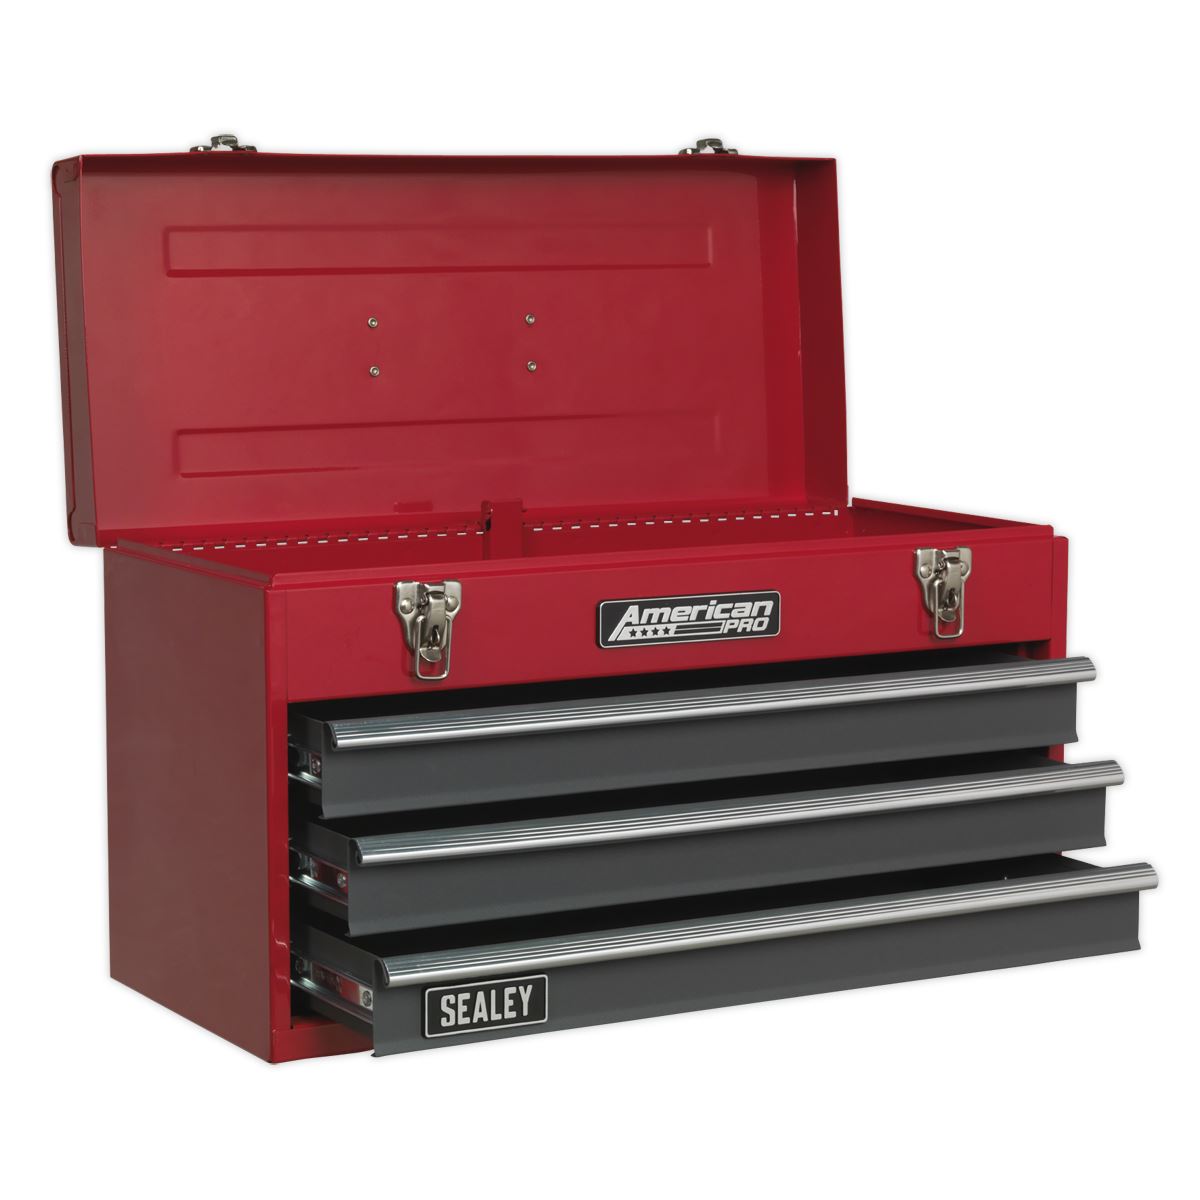 Sealey American Pro Tool Chest 3 Drawer Portable with Ball-Bearing Slides - Red/Grey